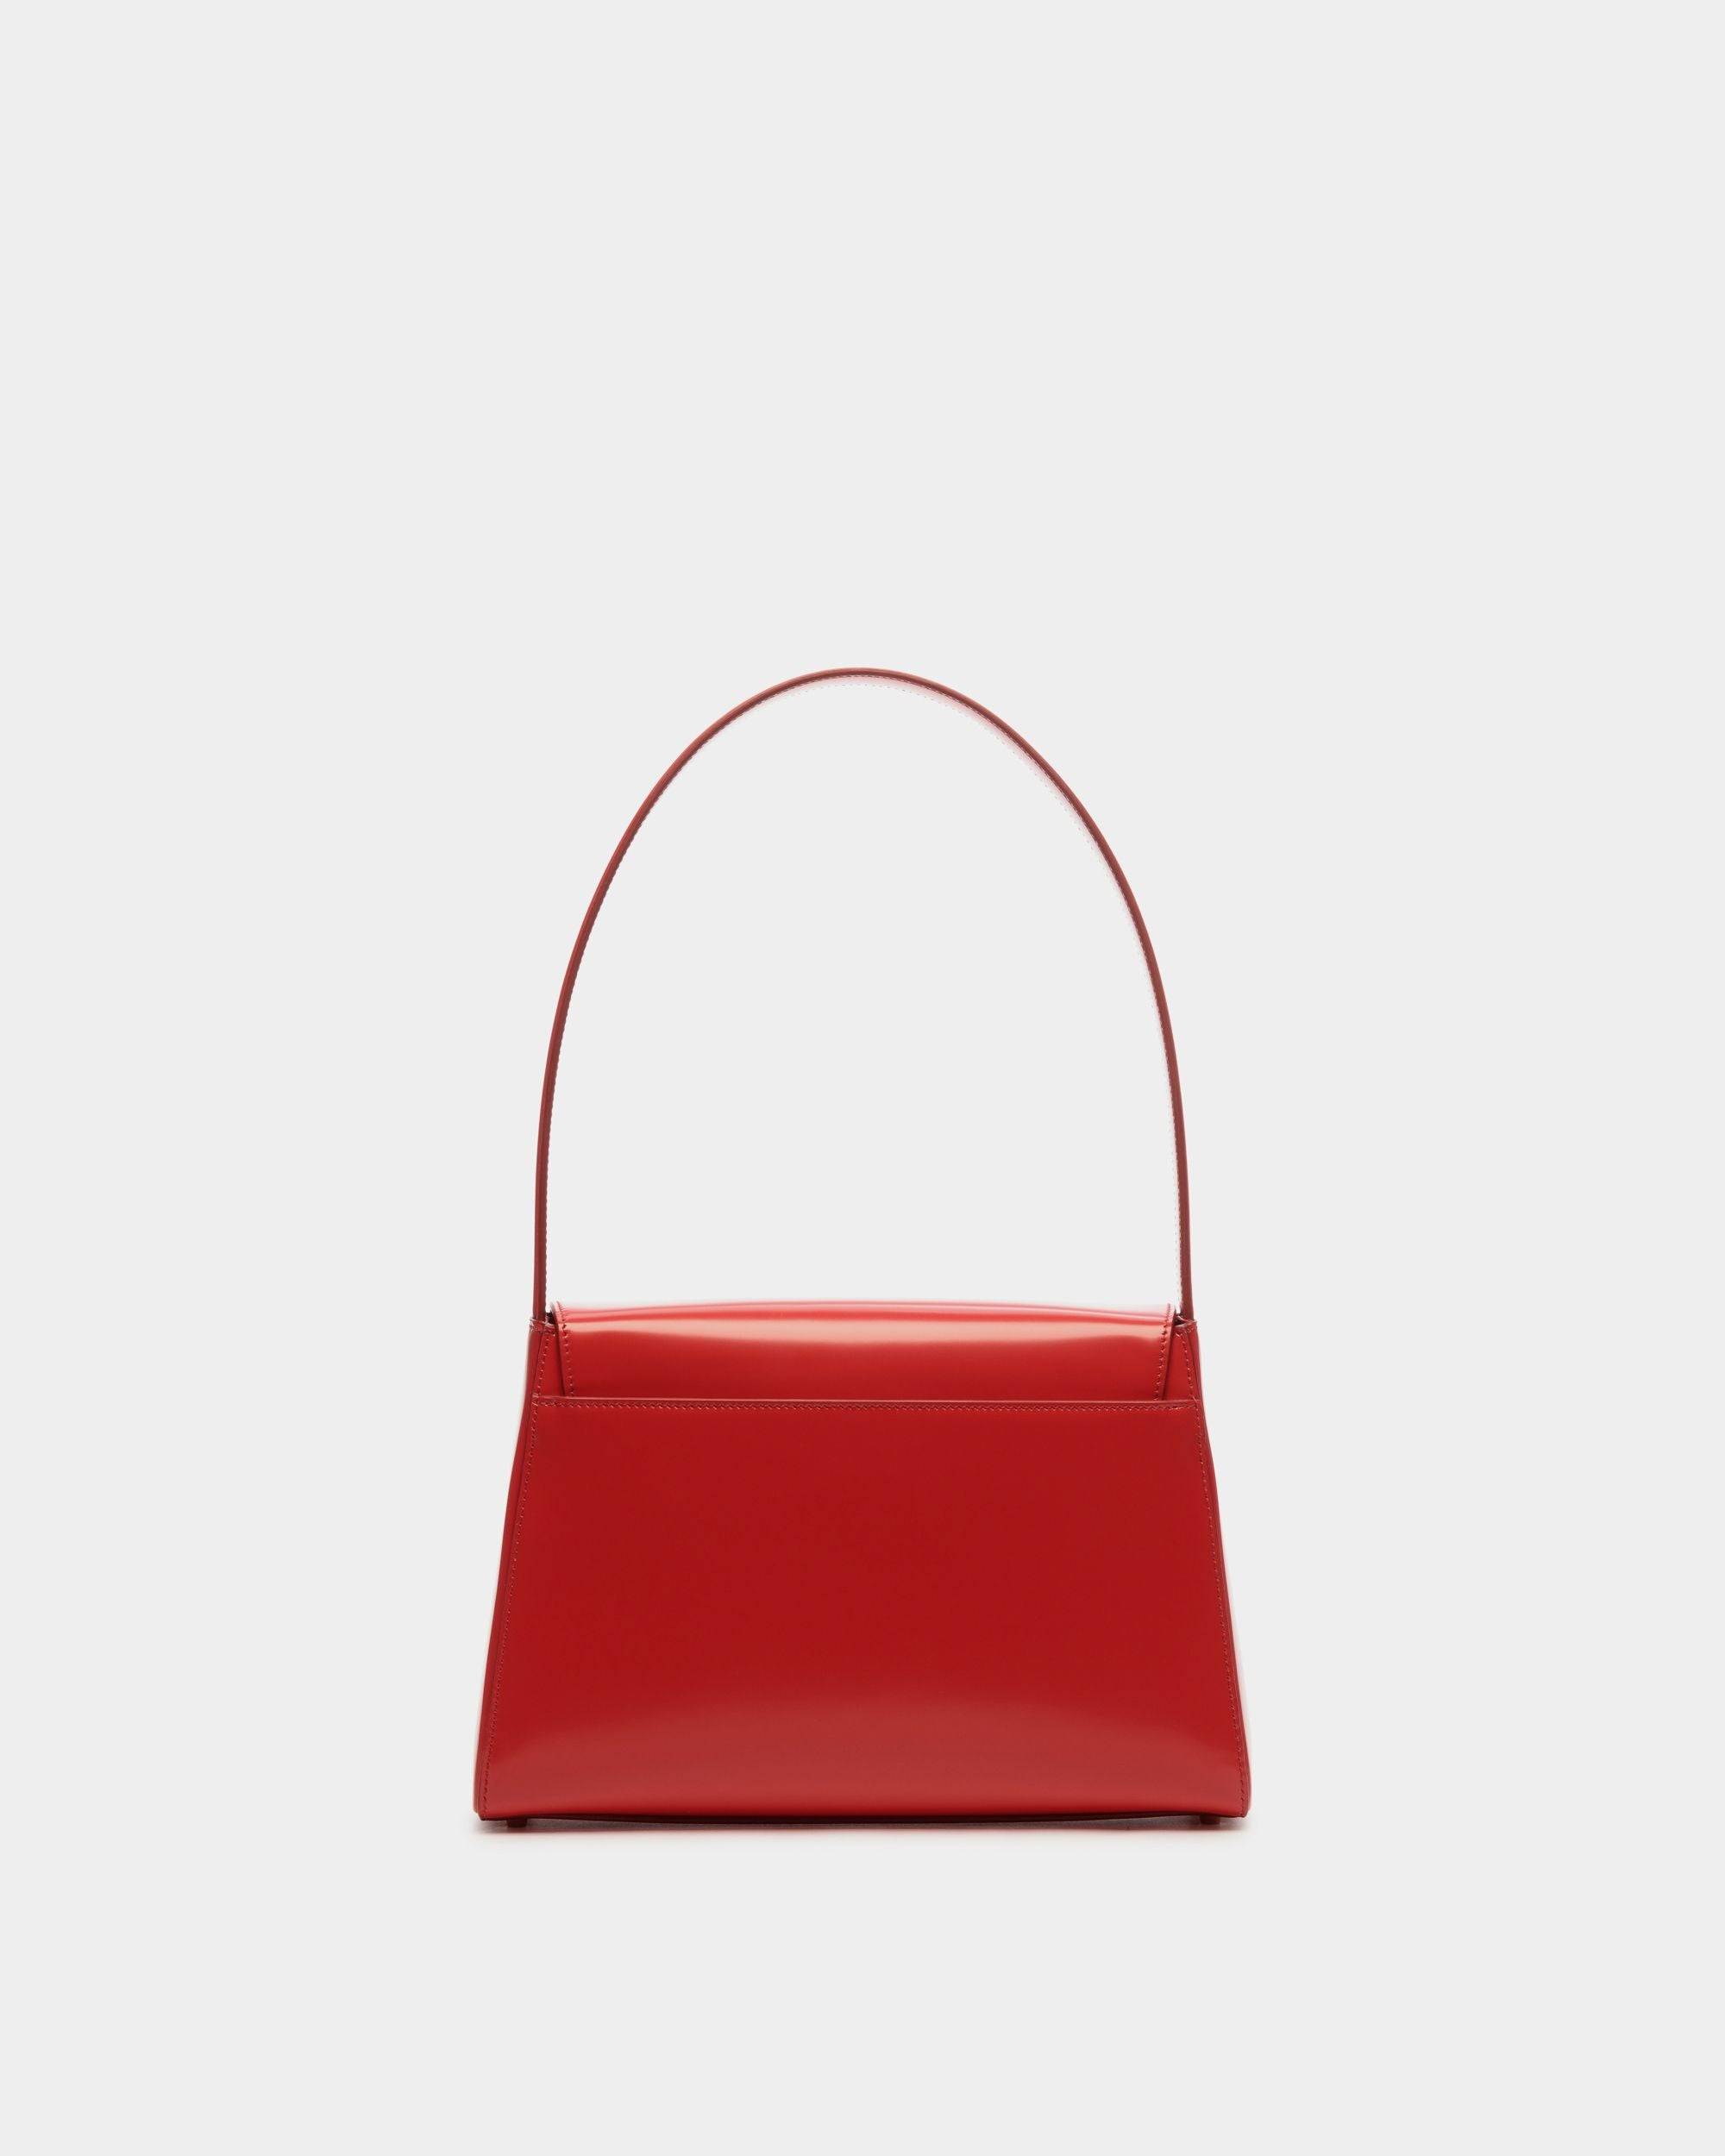 Ollam | Women's Shoulder Bag in Candy Red Brushed Leather | Bally | Still Life Back